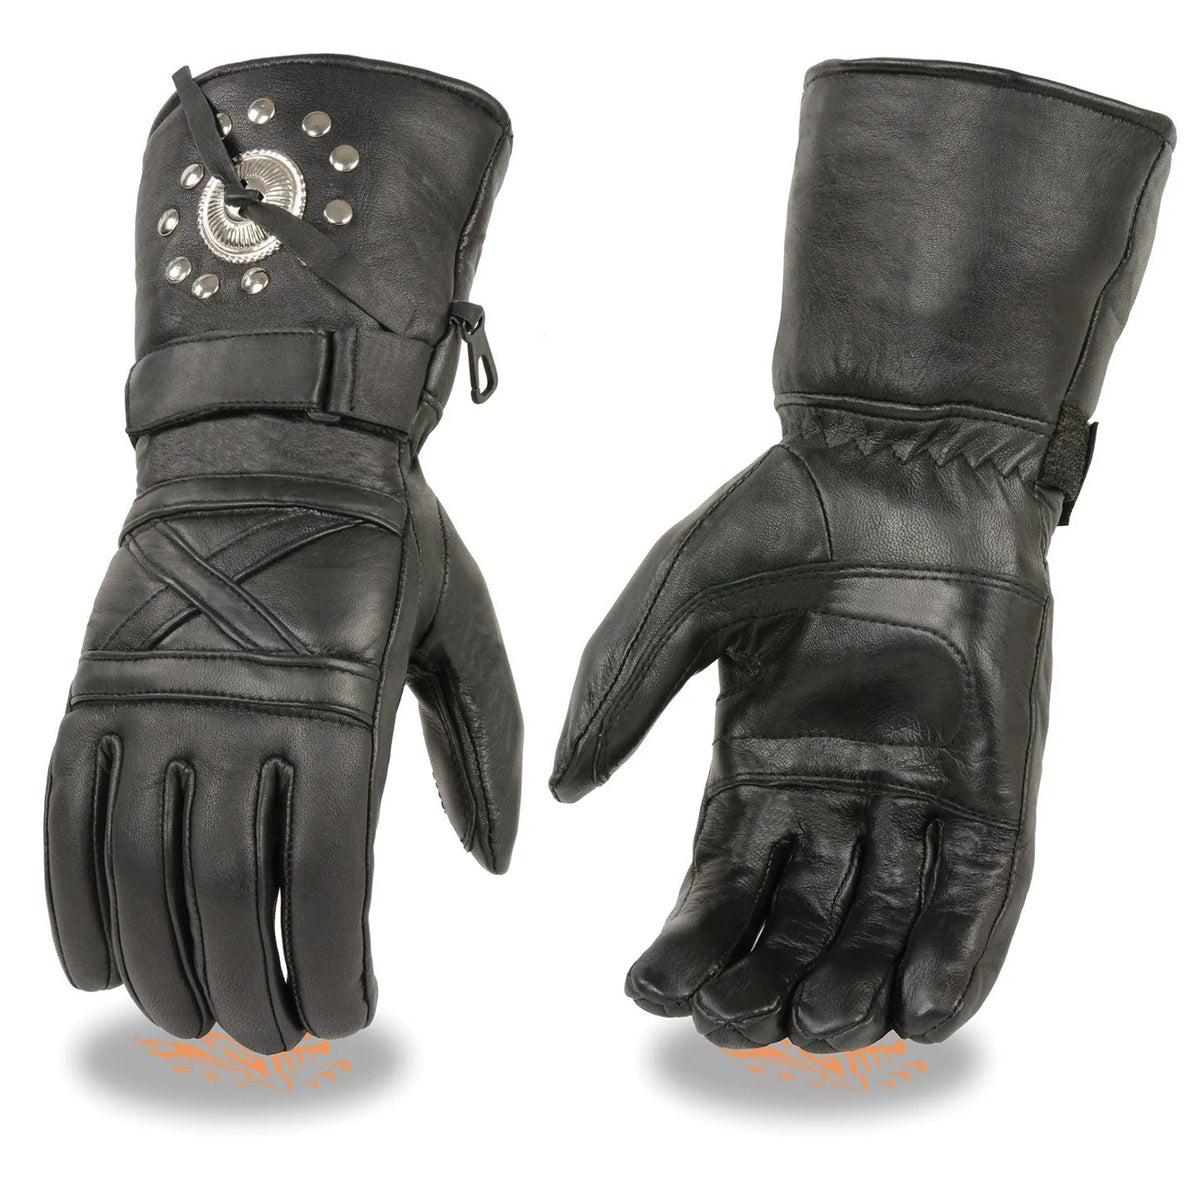 Men's Black Leather Warm Lining Gauntlet Motorcycle Hand Gloves W/ Detailing Cuff and Pull-on Closure